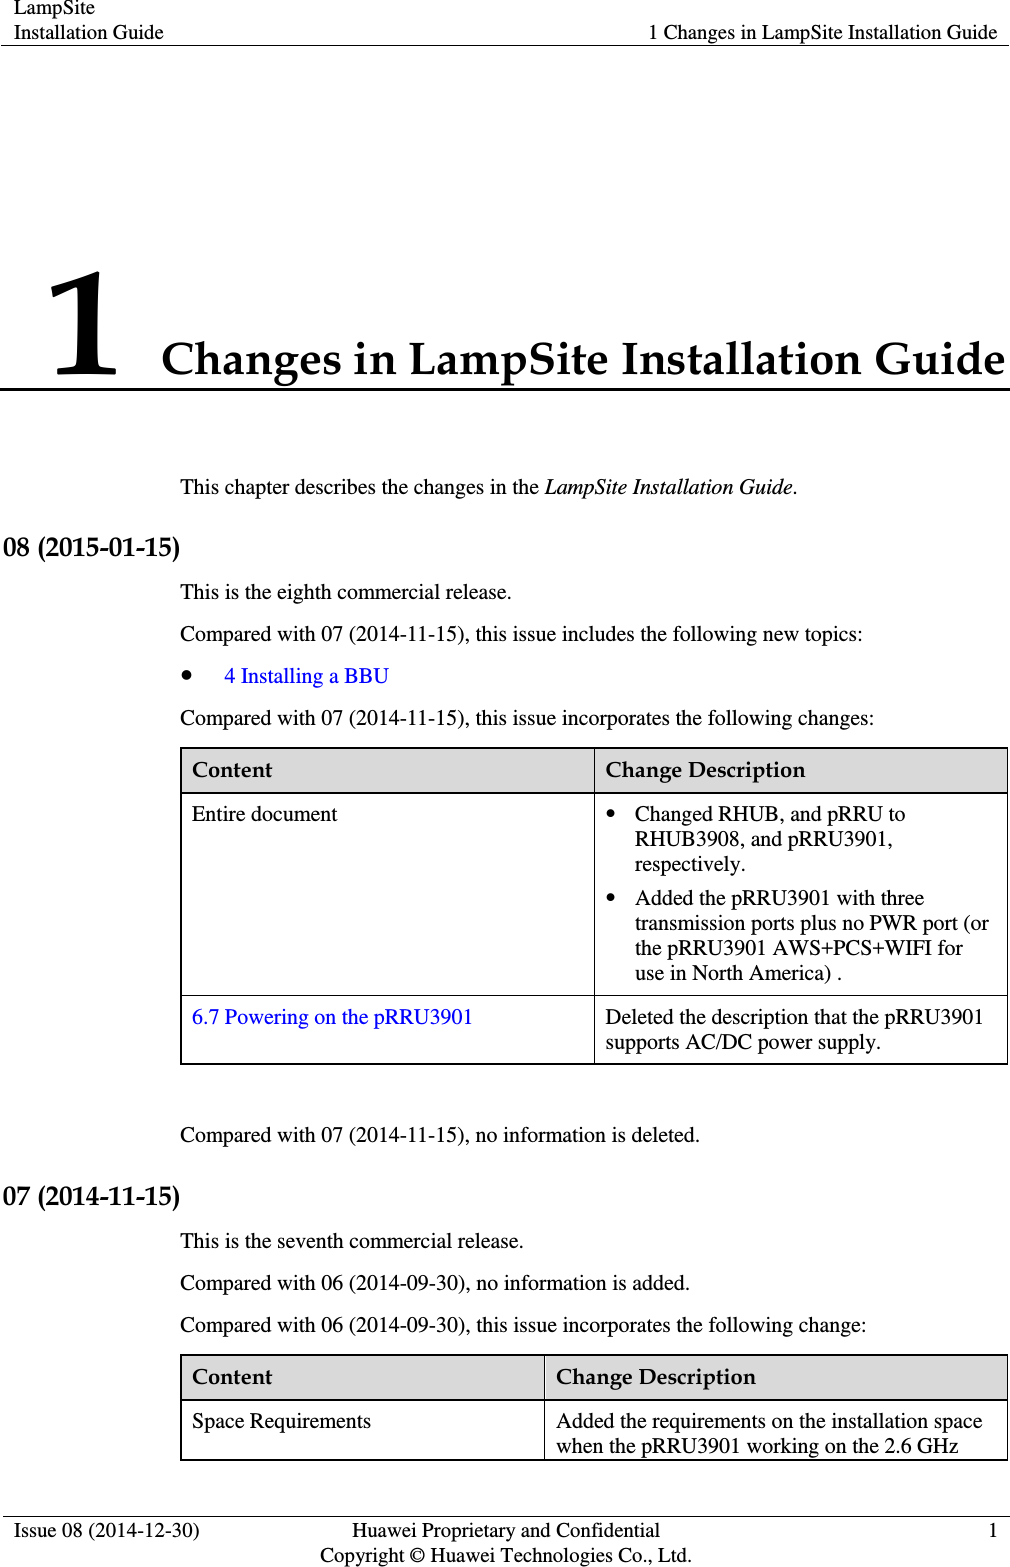 LampSite Installation Guide 1 Changes in LampSite Installation Guide  Issue 08 (2014-12-30) Huawei Proprietary and Confidential                                     Copyright © Huawei Technologies Co., Ltd. 1  1 Changes in LampSite Installation Guide This chapter describes the changes in the LampSite Installation Guide. 08 (2015-01-15) This is the eighth commercial release. Compared with 07 (2014-11-15), this issue includes the following new topics:  4 Installing a BBU Compared with 07 (2014-11-15), this issue incorporates the following changes: Content Change Description Entire document  Changed RHUB, and pRRU to RHUB3908, and pRRU3901, respectively.  Added the pRRU3901 with three transmission ports plus no PWR port (or the pRRU3901 AWS+PCS+WIFI for use in North America) . 6.7 Powering on the pRRU3901 Deleted the description that the pRRU3901 supports AC/DC power supply.  Compared with 07 (2014-11-15), no information is deleted. 07 (2014-11-15) This is the seventh commercial release. Compared with 06 (2014-09-30), no information is added. Compared with 06 (2014-09-30), this issue incorporates the following change: Content Change Description Space Requirements Added the requirements on the installation space when the pRRU3901 working on the 2.6 GHz 